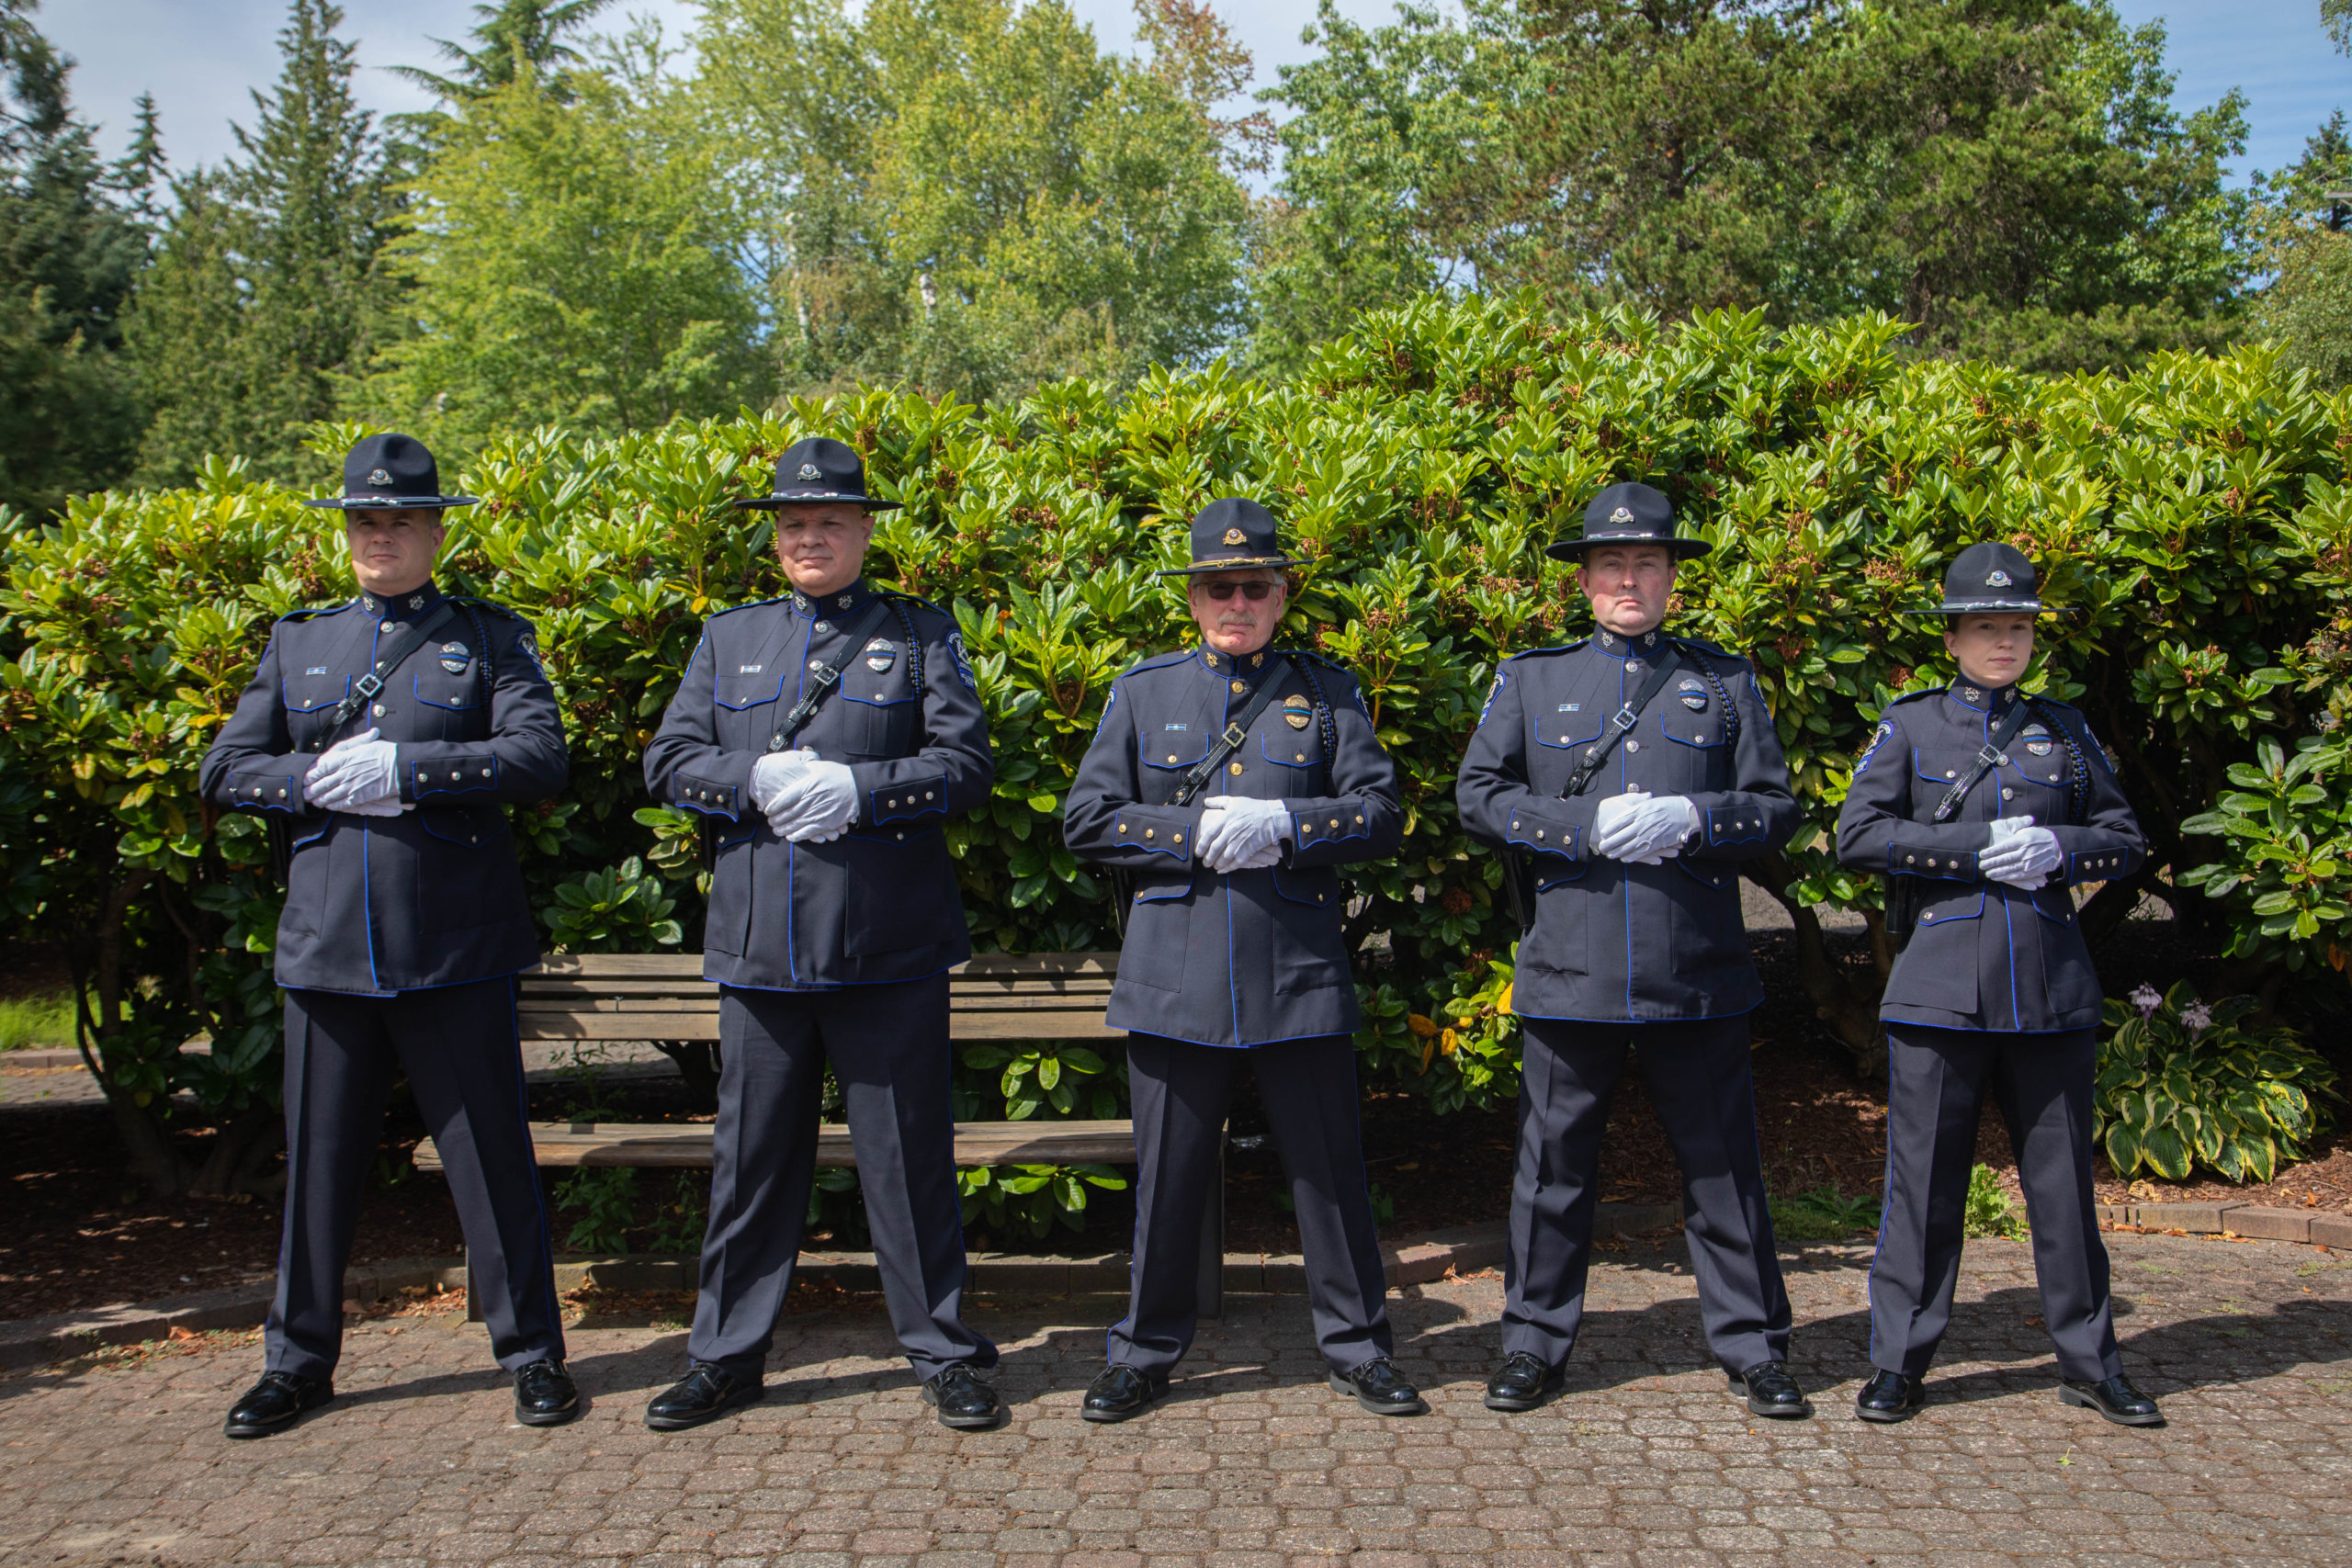 With the deepest respect members of the SSCHG stand with the families of the Bothell Police Department during this very difficult time